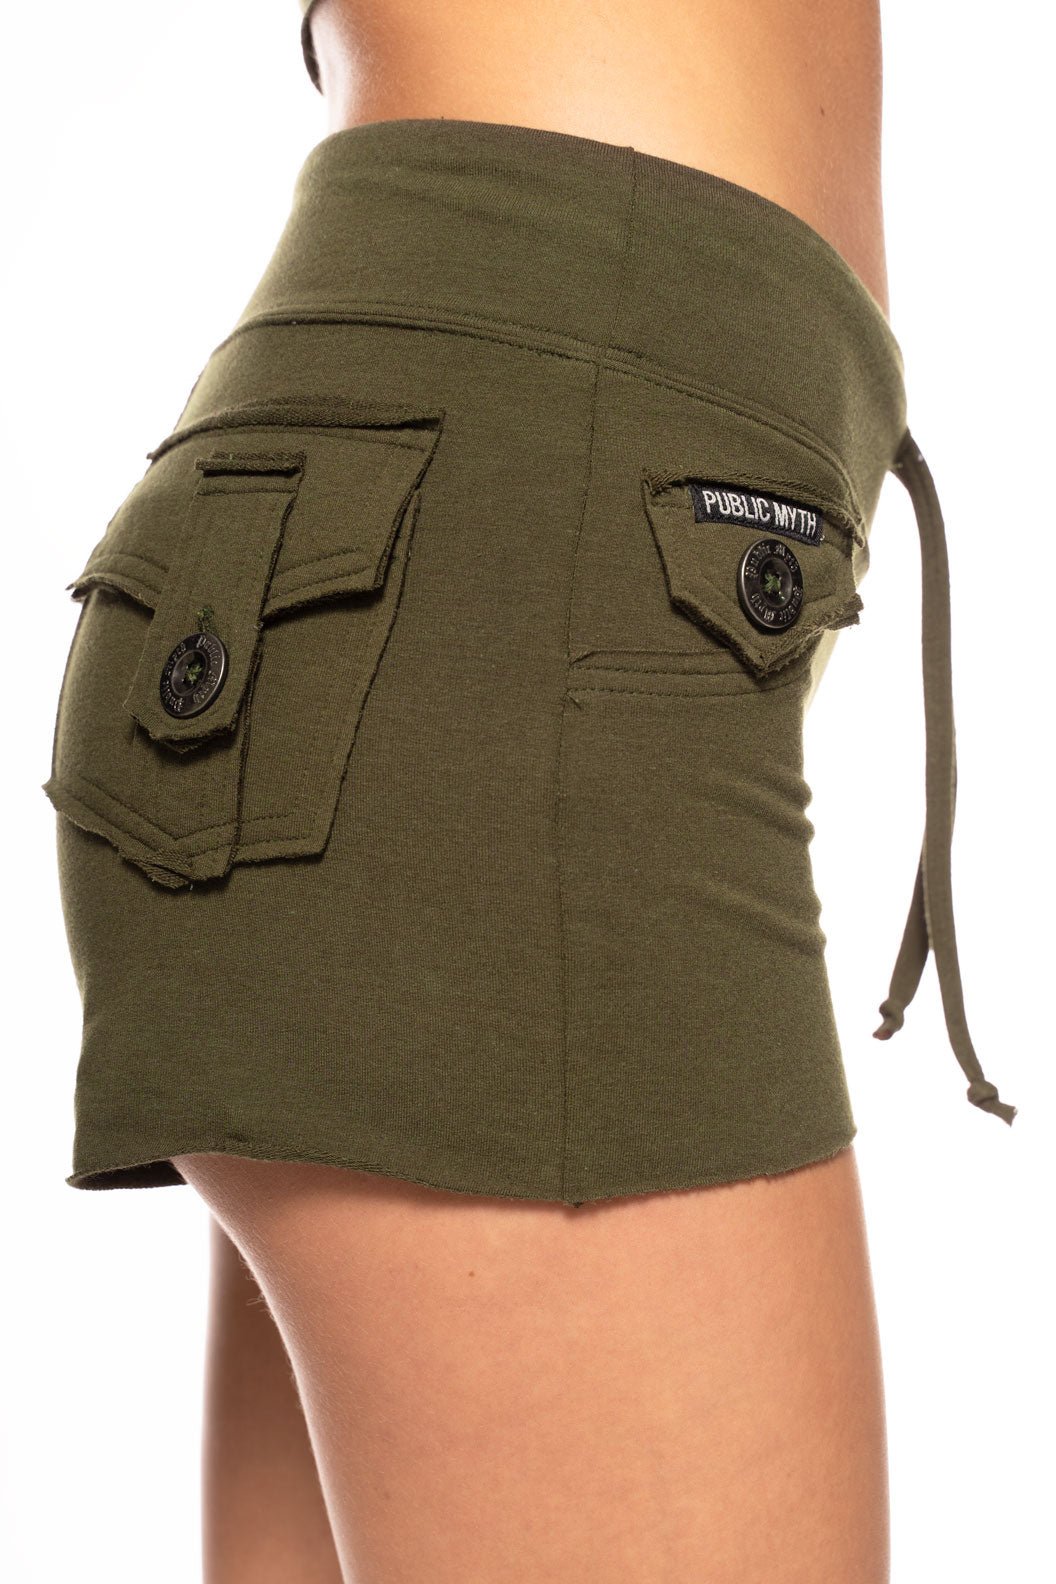 Booty shorts with button pockets in olive green ethically made from a soft and sustainalbe bamboo cotton terry